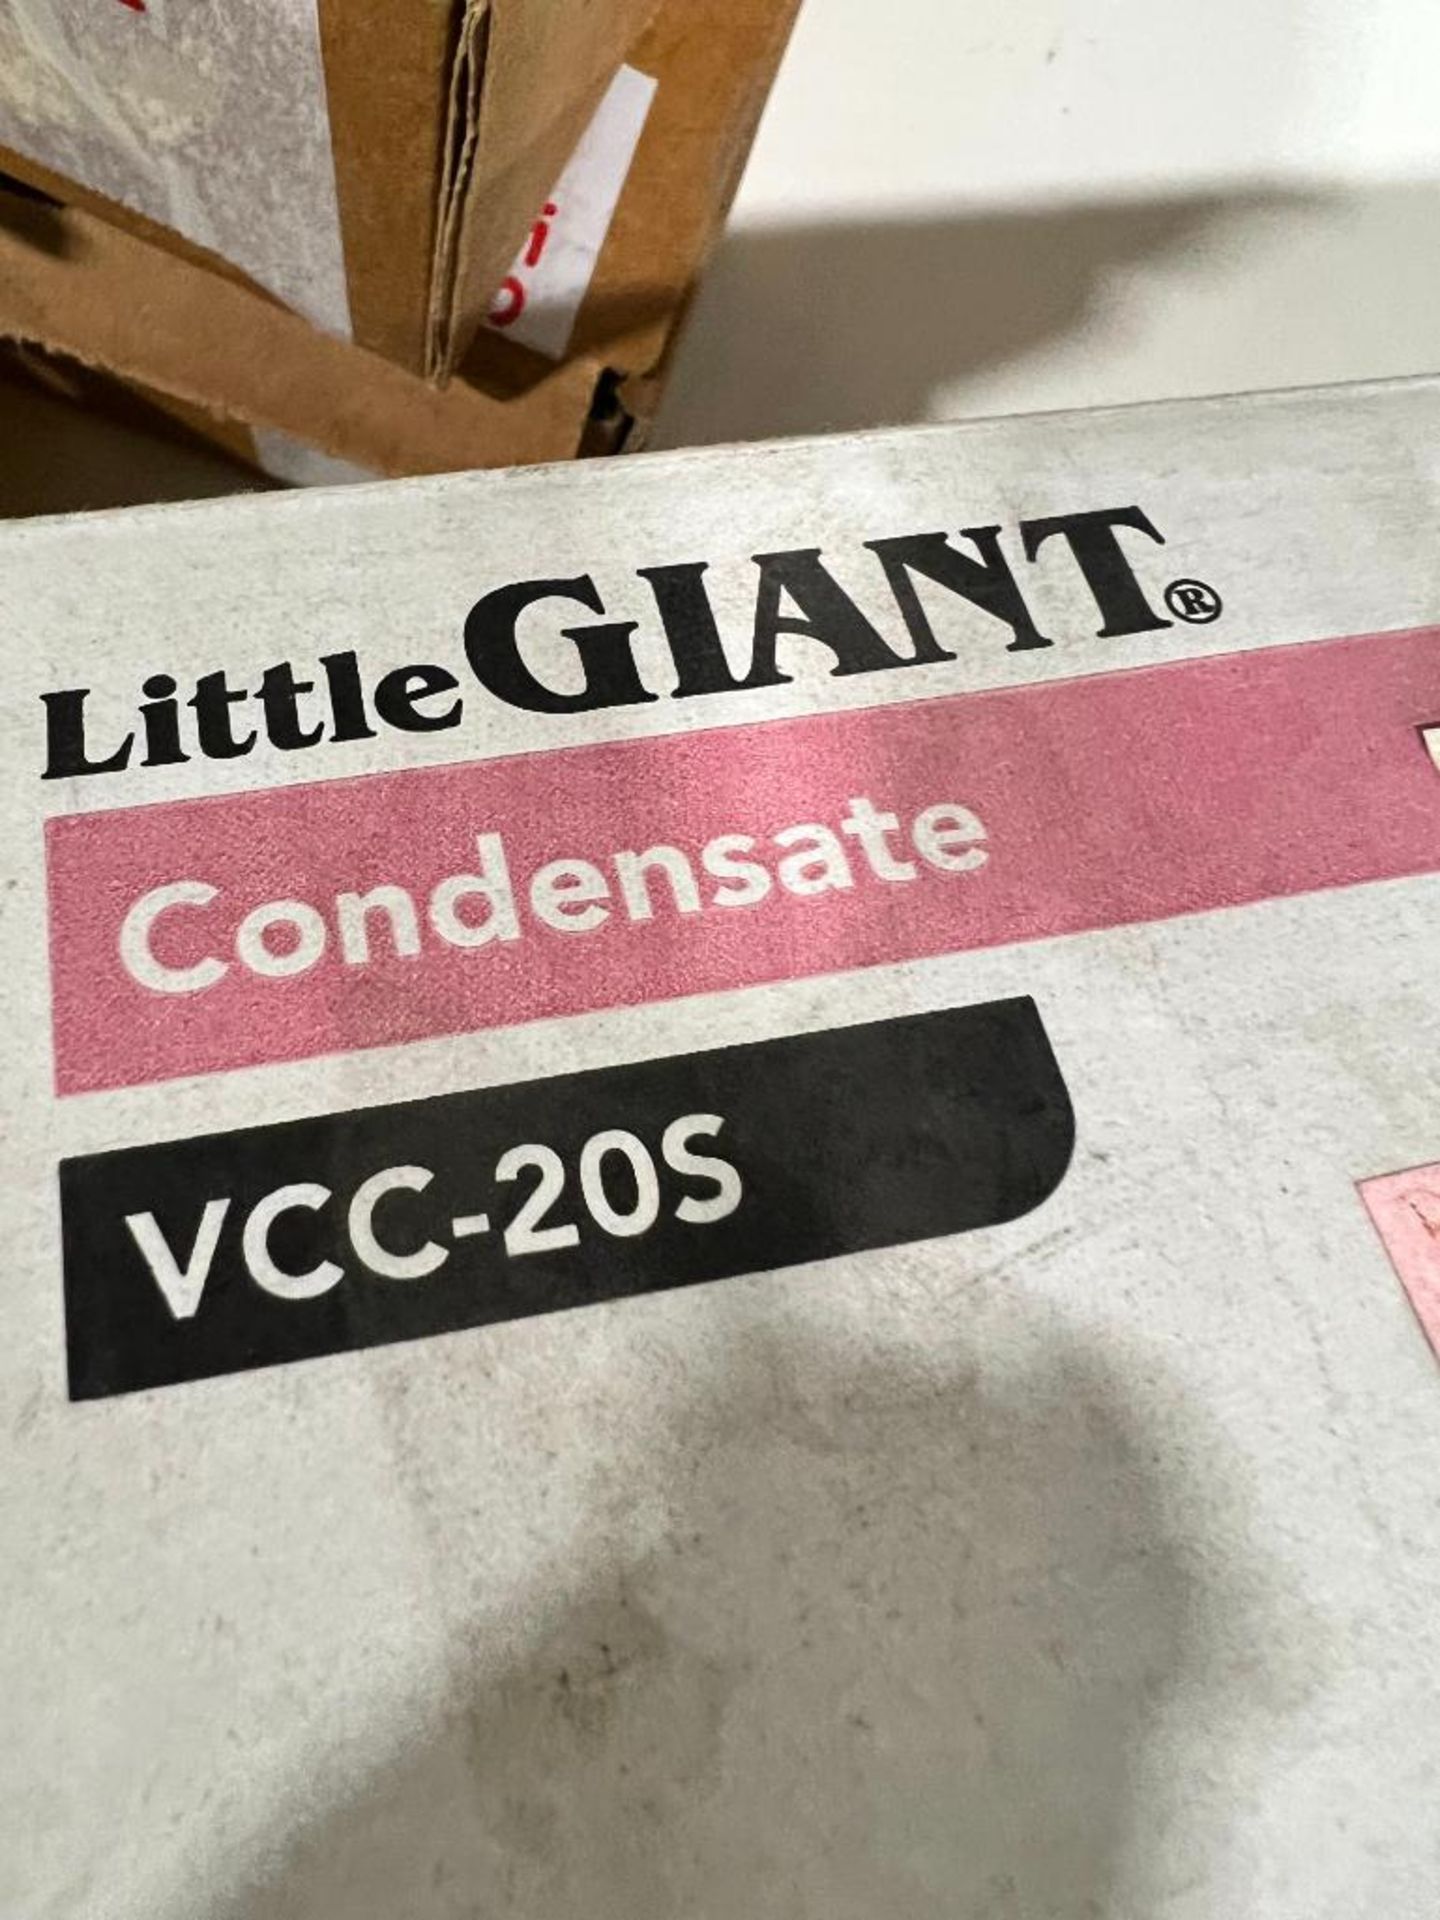 (New) Little Giant Condensate, Model VCC205 - Image 3 of 3